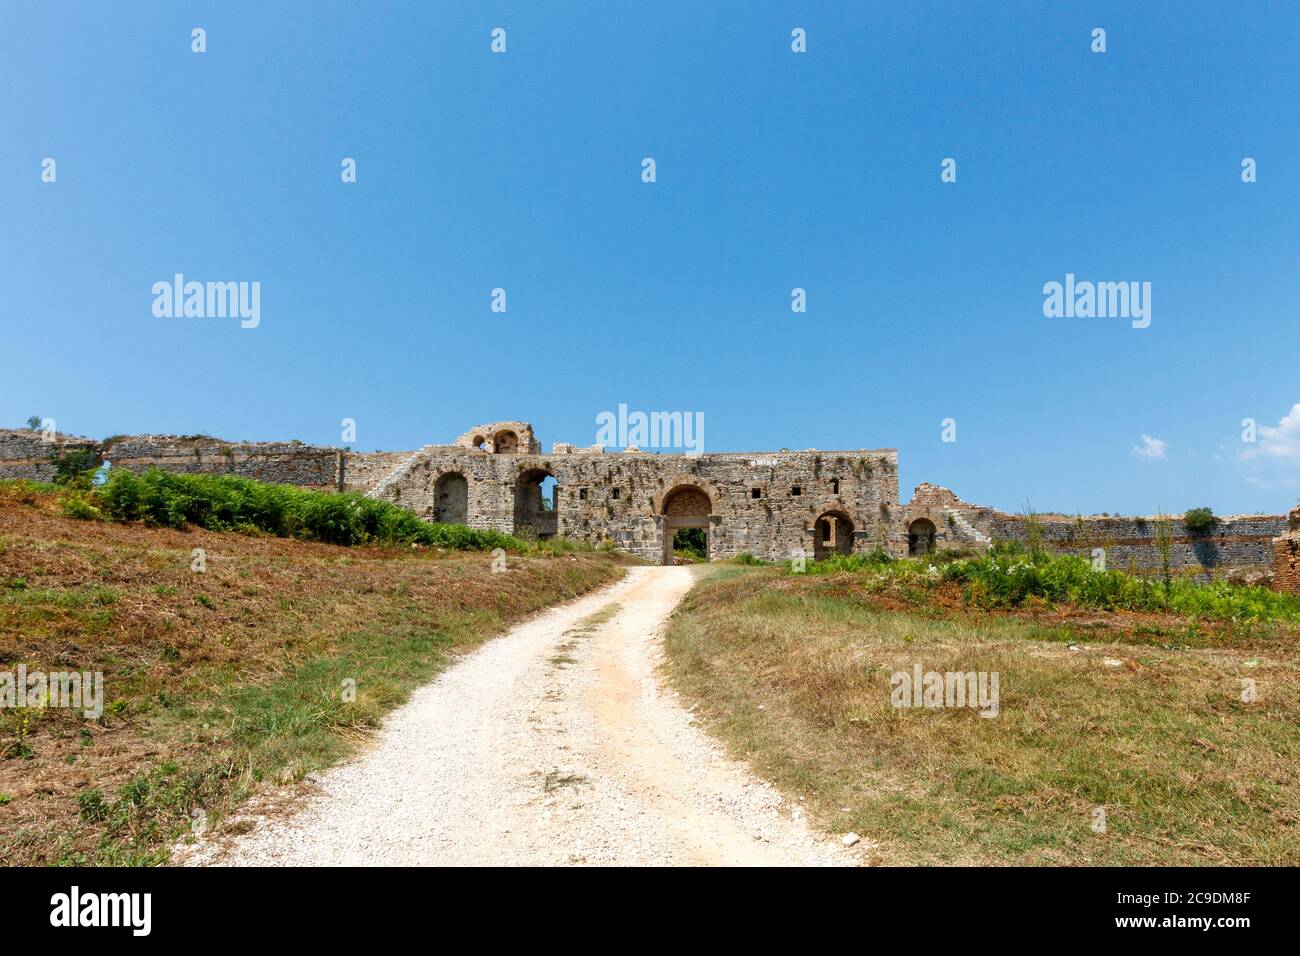 The walls of Ancient Nikopolis (probably the largest archaeological site in Greece) close to Preveza town, Epirus. Stock Photo